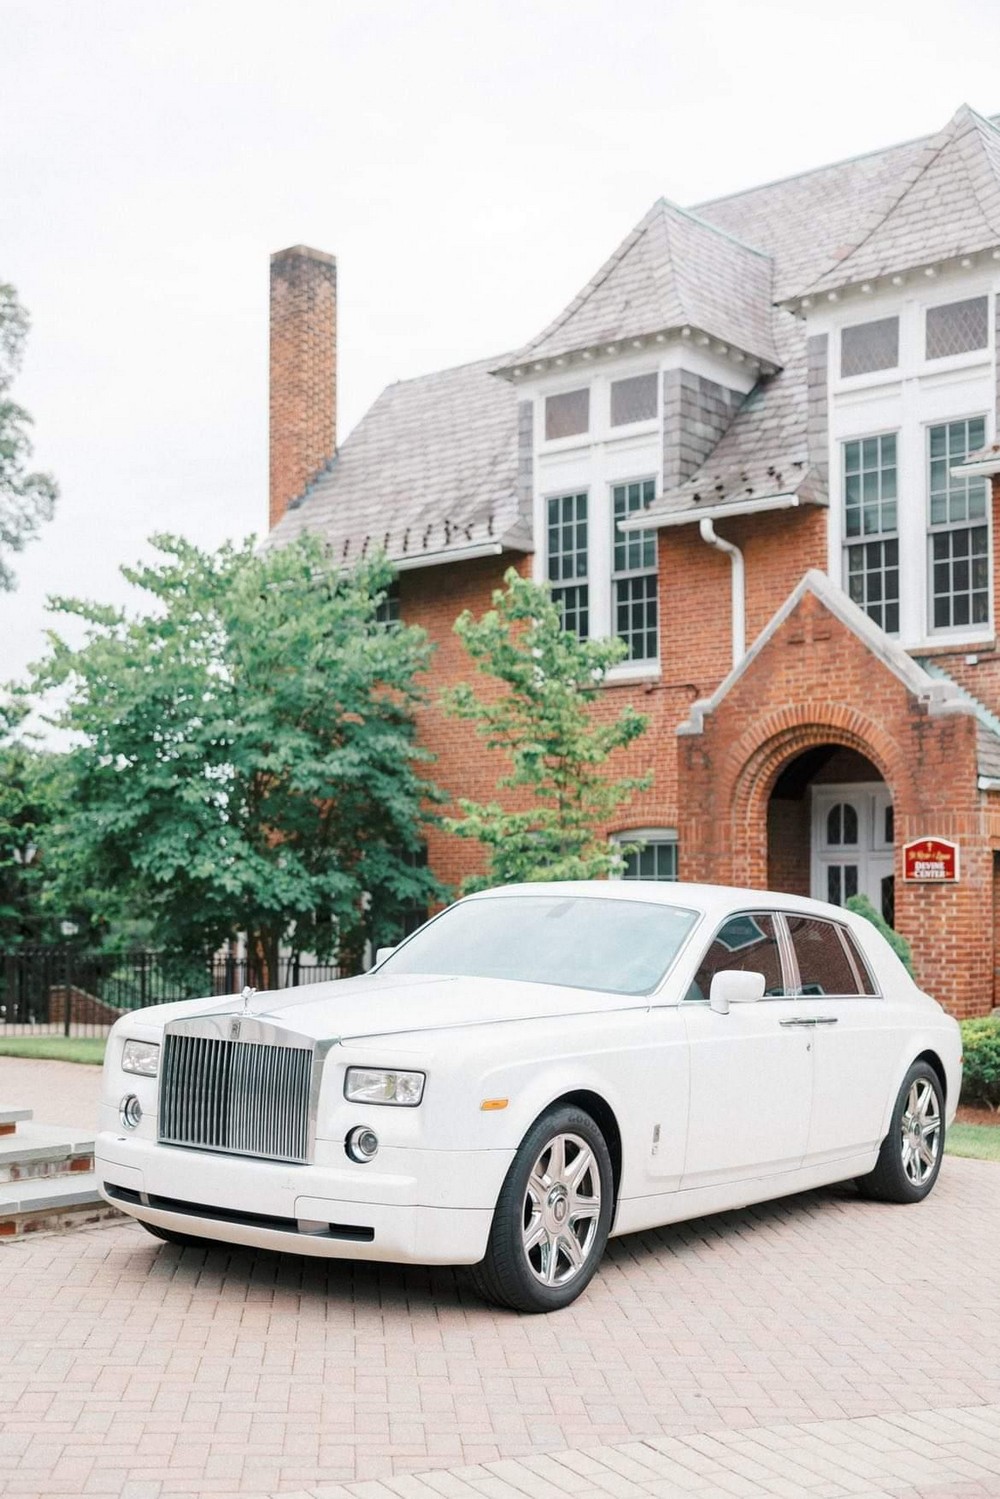 Professional, High-End Car Service to Maplewood, NJ from Caldwell, NJ in Phantom Rolls-Royce